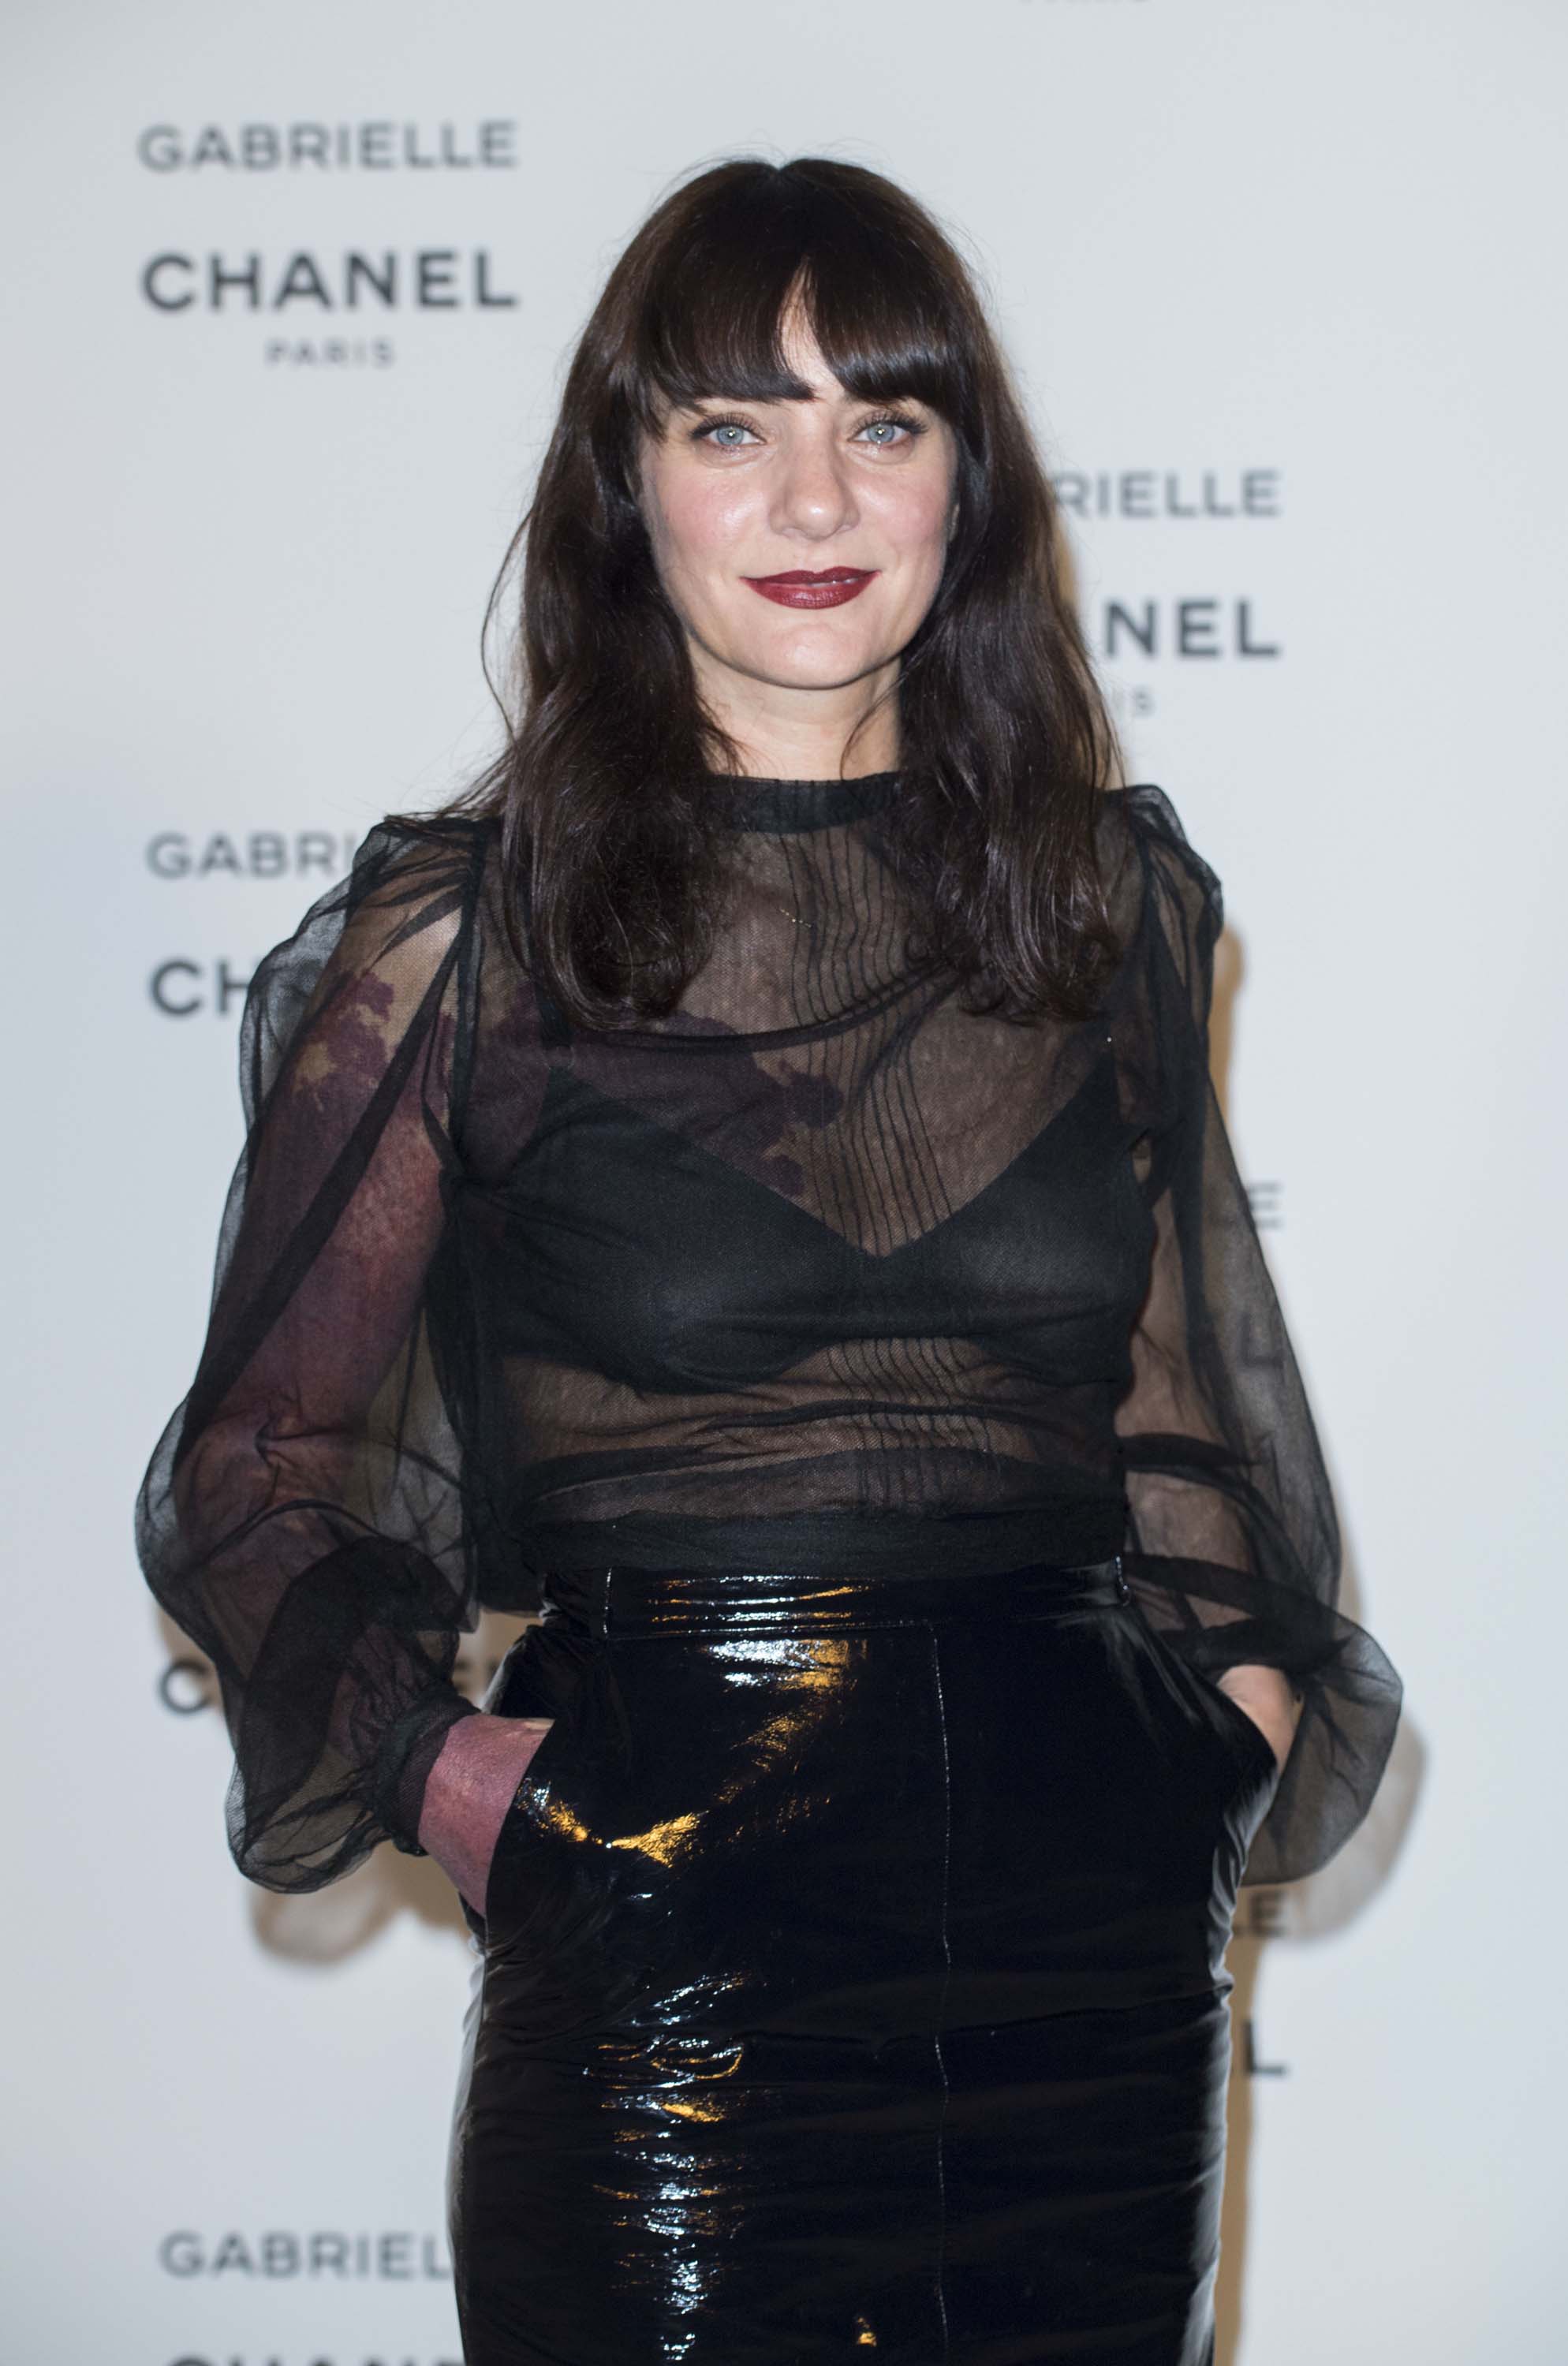 Lucia Pica attends Chanel Perfume Gabrielle Launch Party